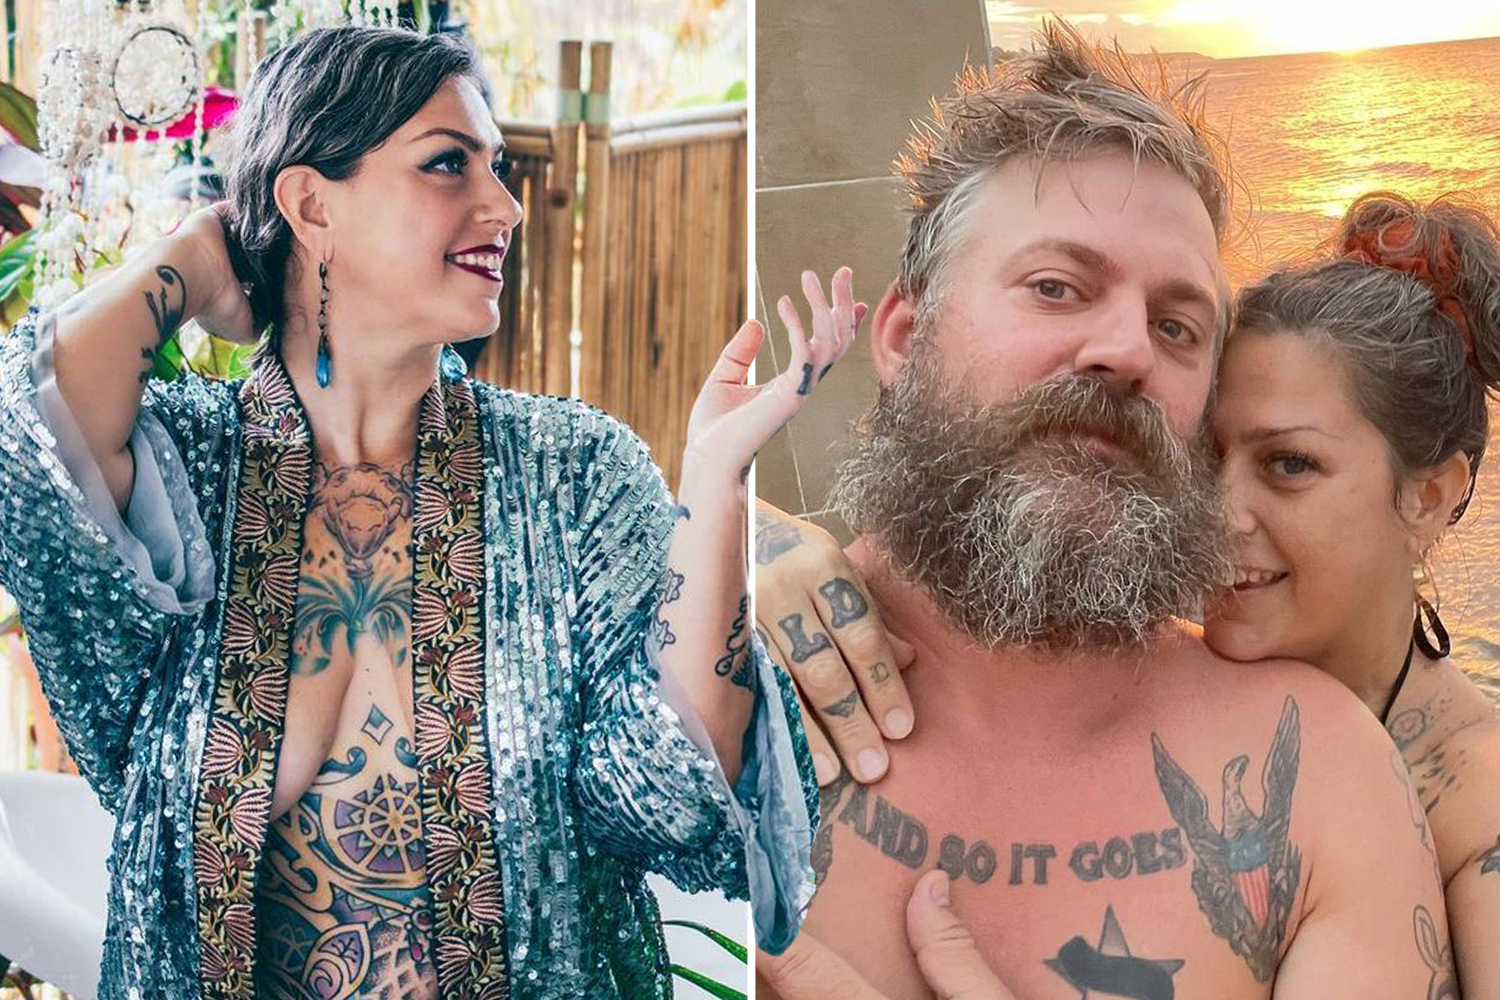 chris delamere share images of danielle colby photos